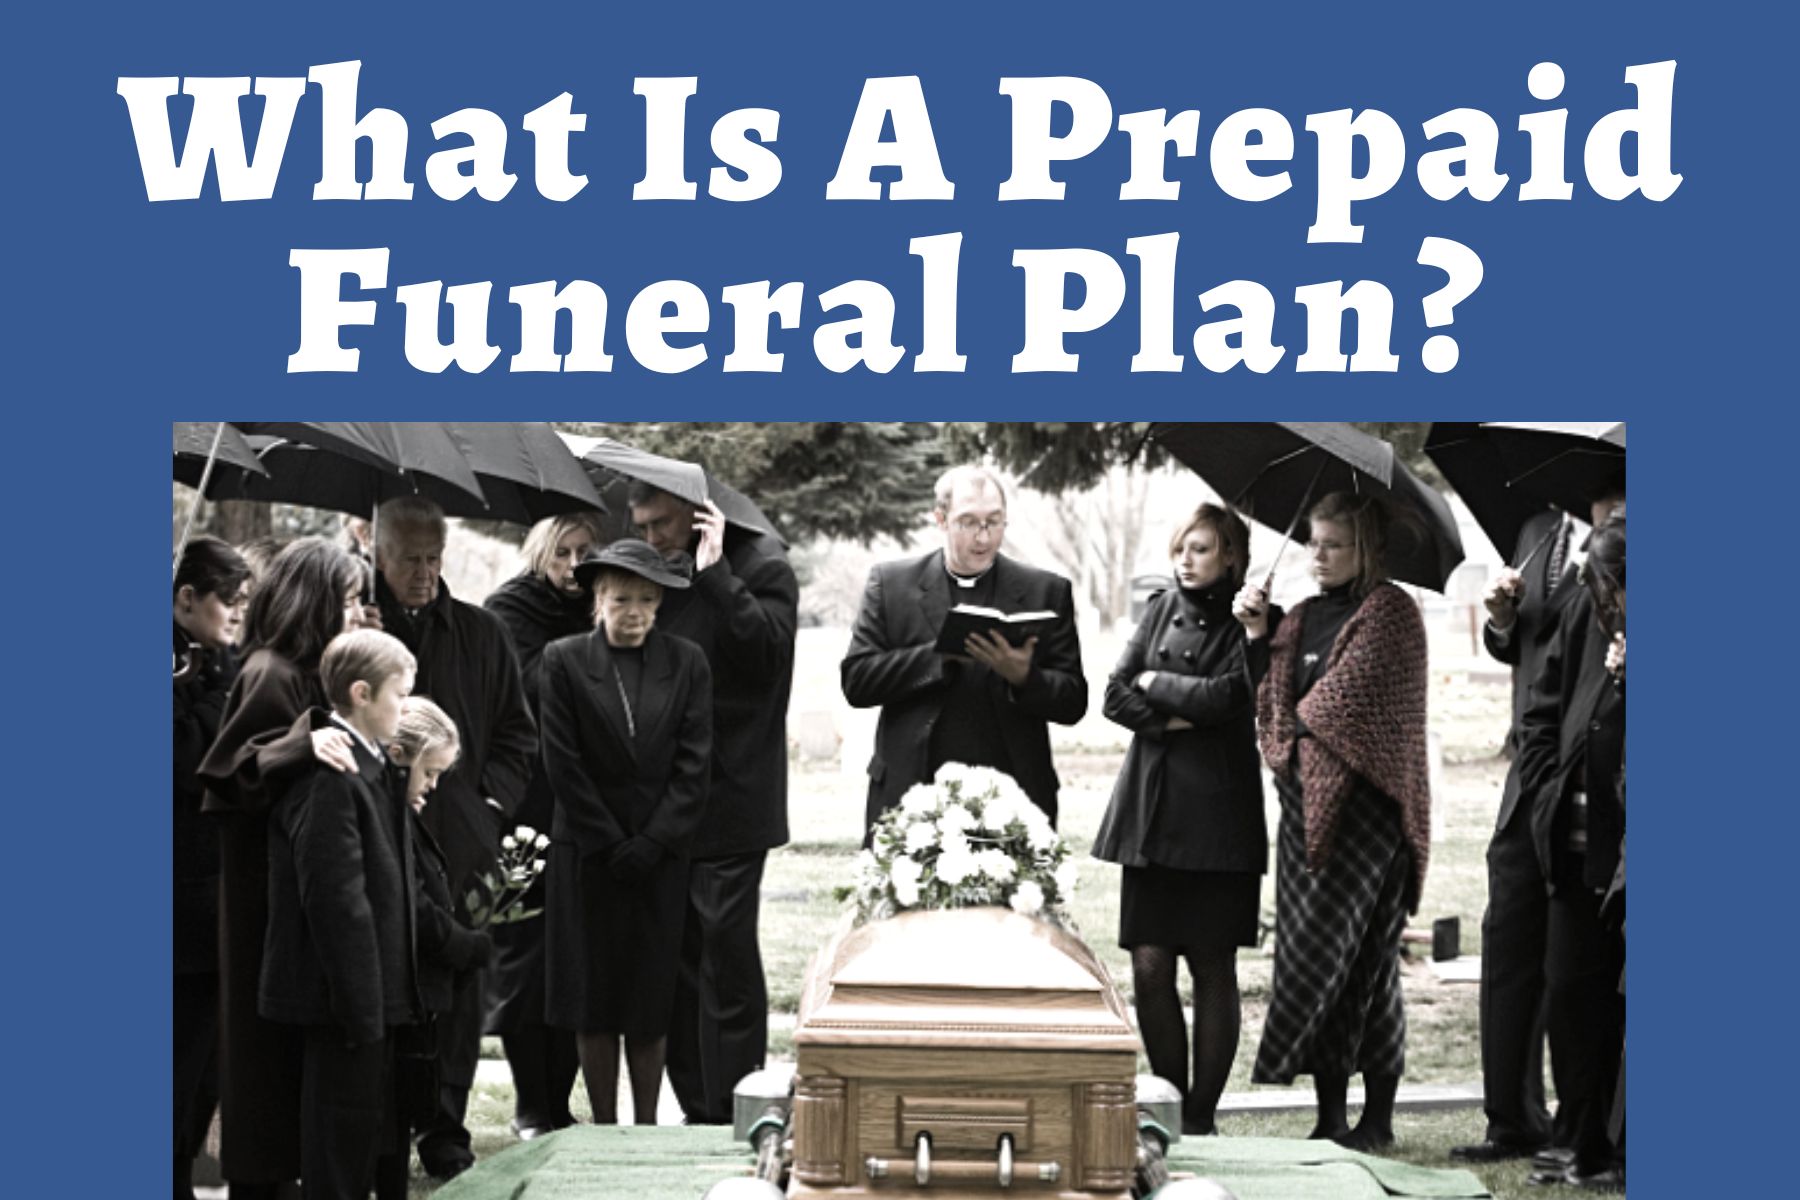 pre paid funeral plan, burial insurance, funeral insurance